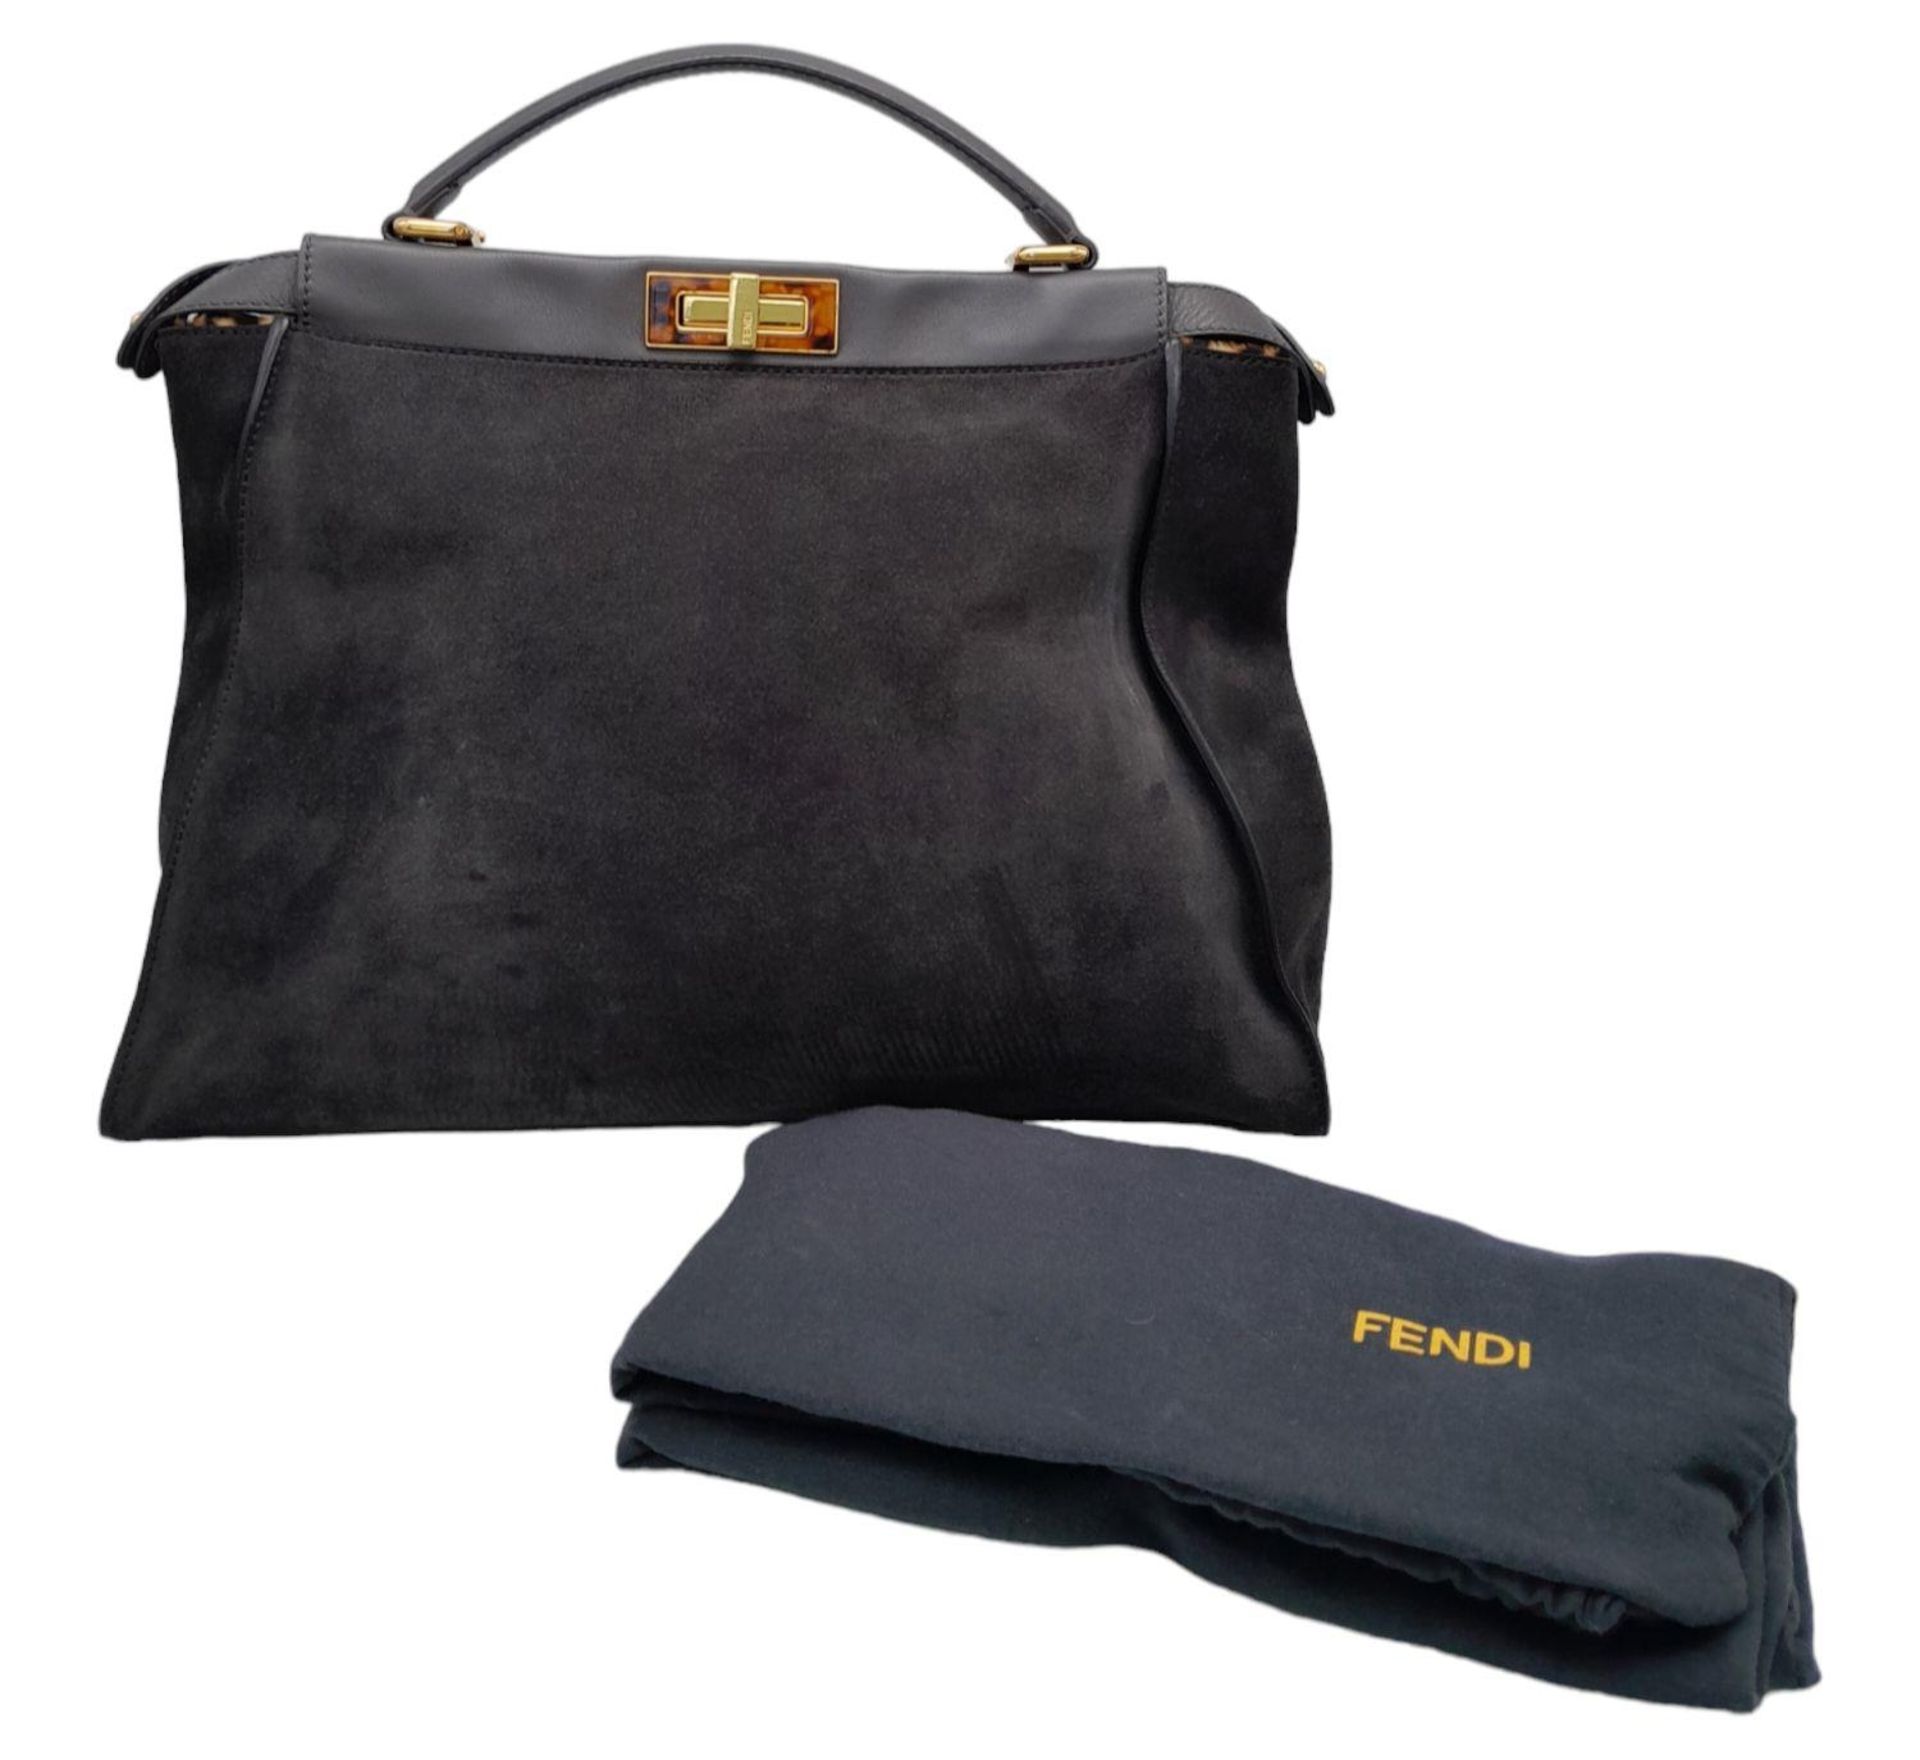 A Fendi Grey Peekaboo Bag. Suede exterior with leather trim, single leather handle, gold-toned - Bild 3 aus 9